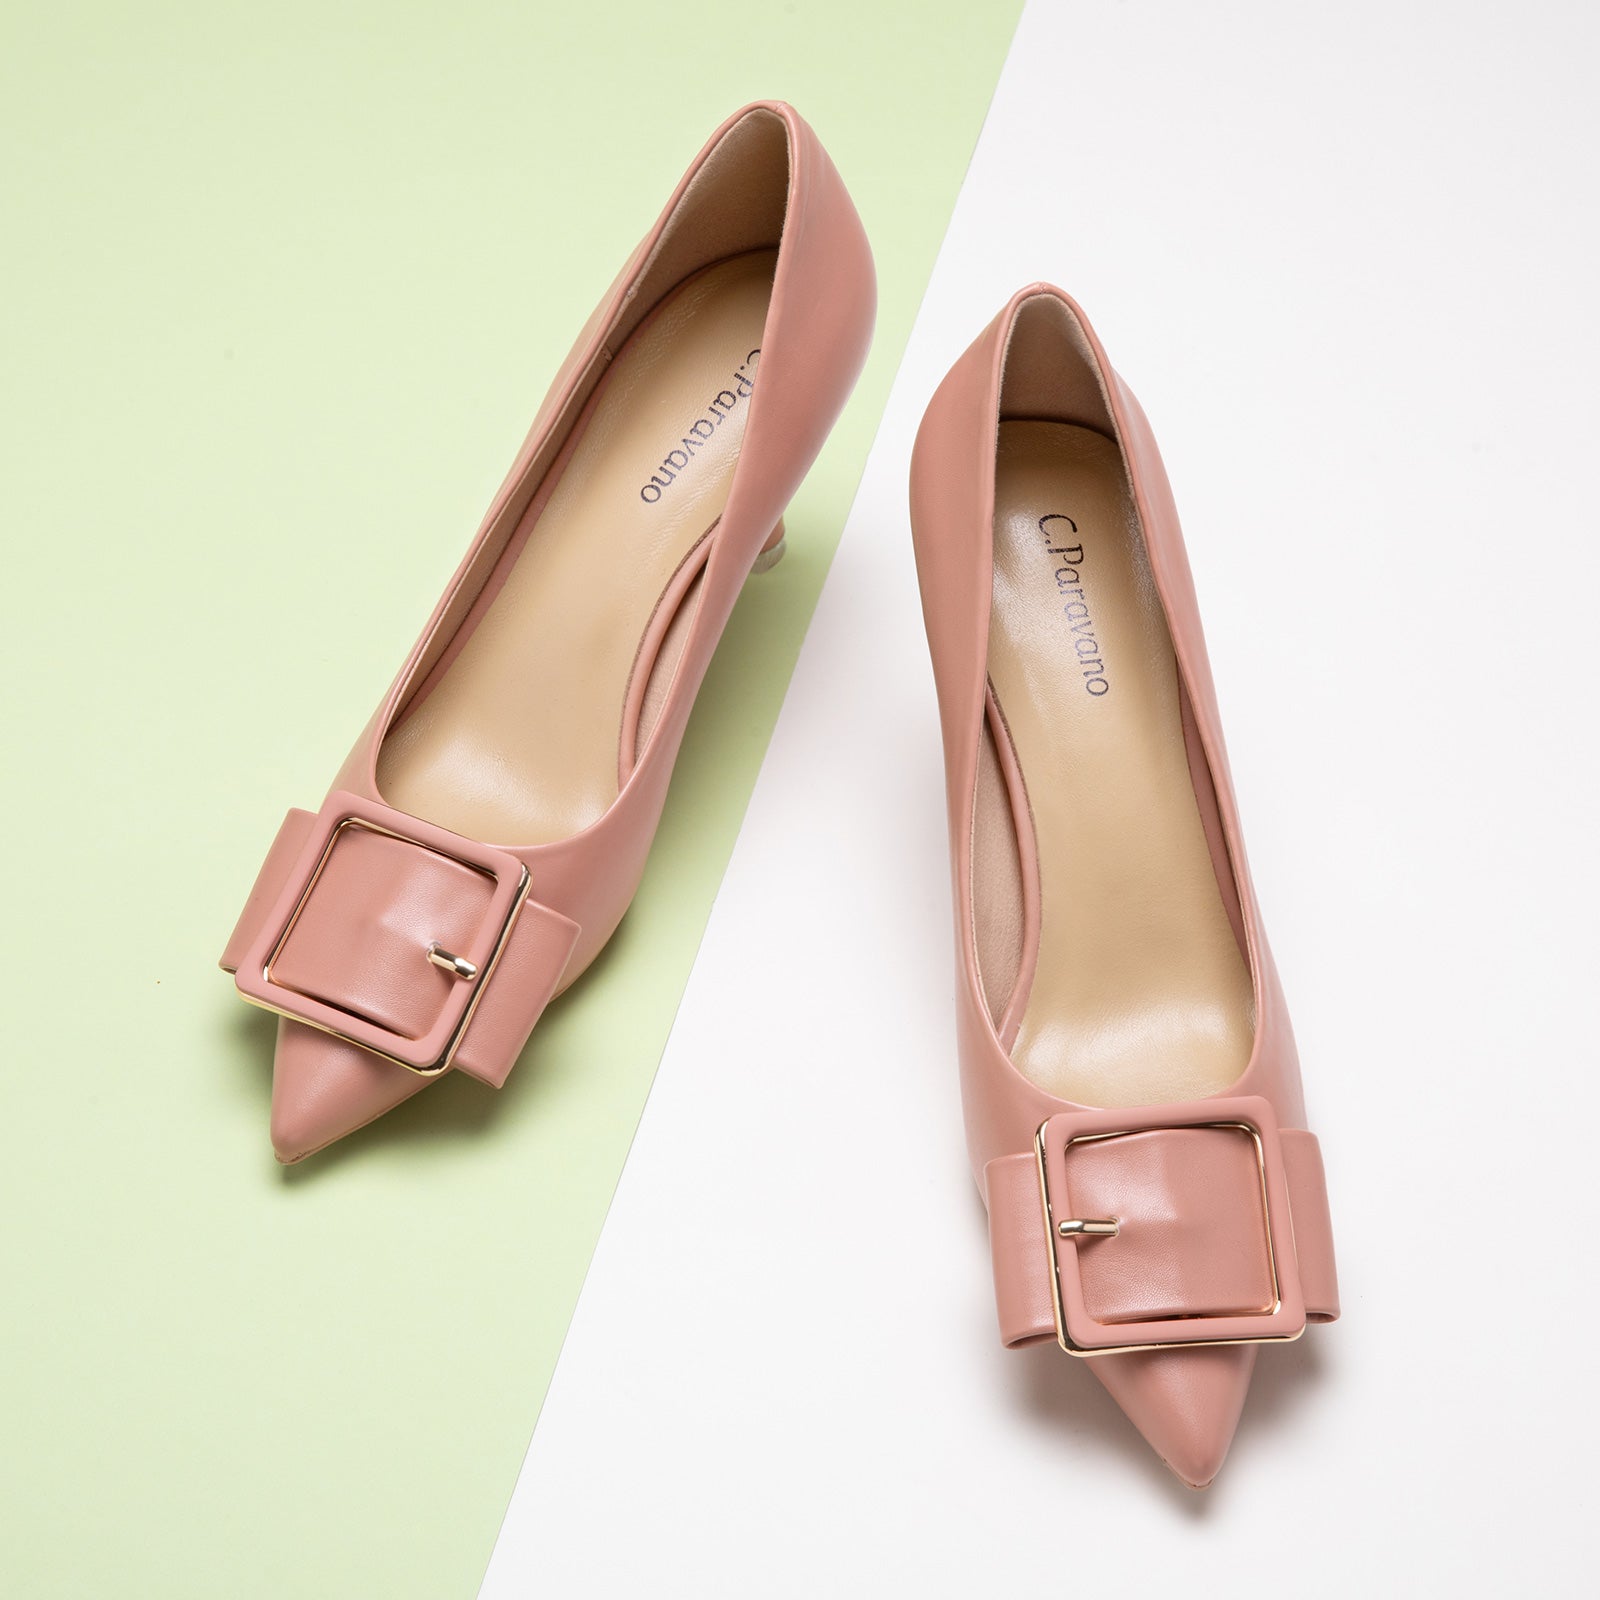  Pink Square Buckled Pumps, featuring delicate details for a polished and sophisticated style